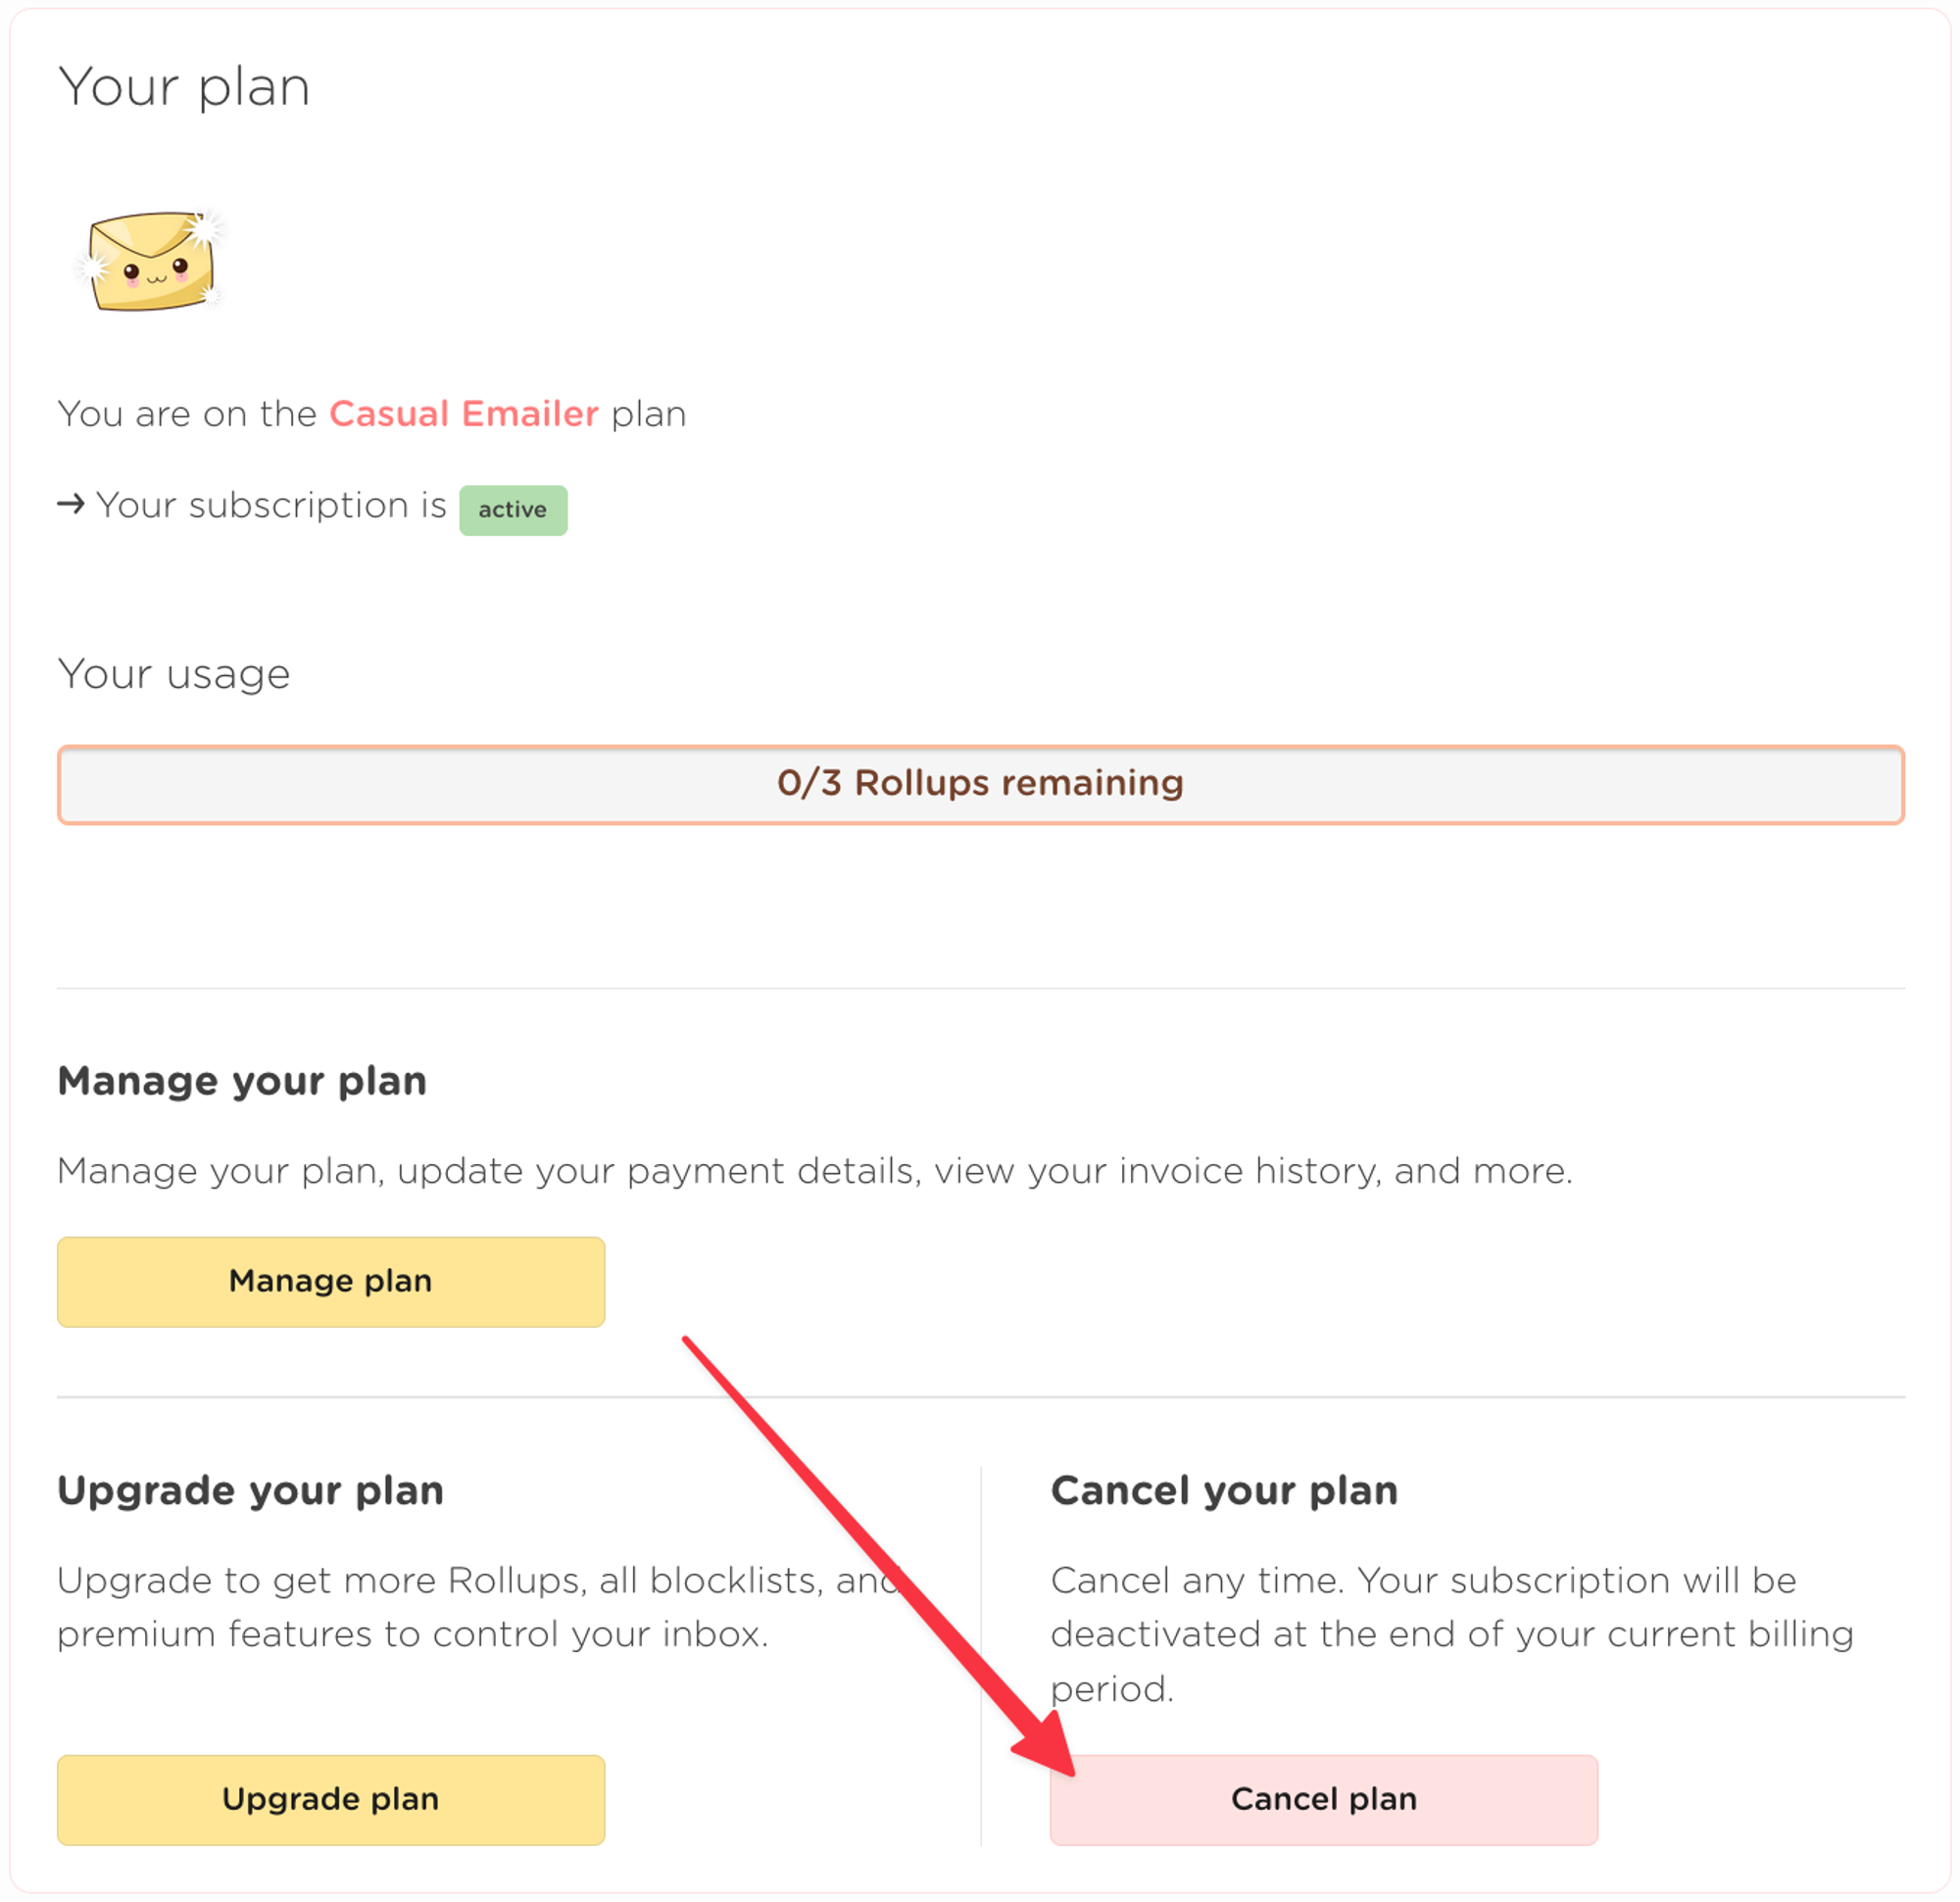 Cancel your plan from the billing page